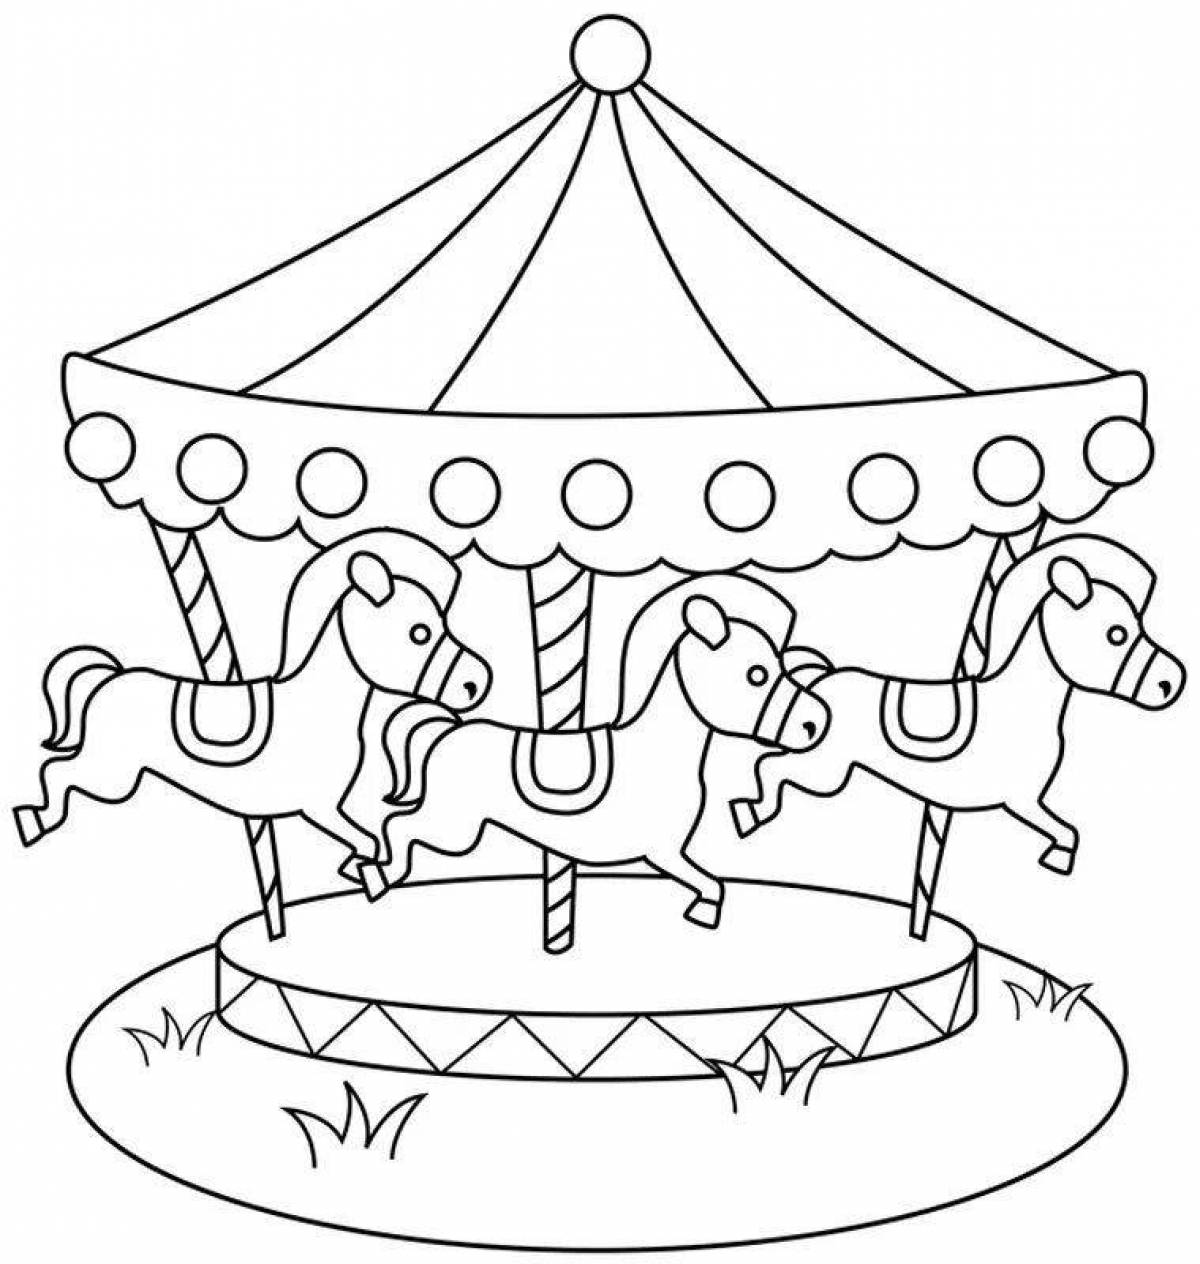 Merry circus coloring for children 6-7 years old